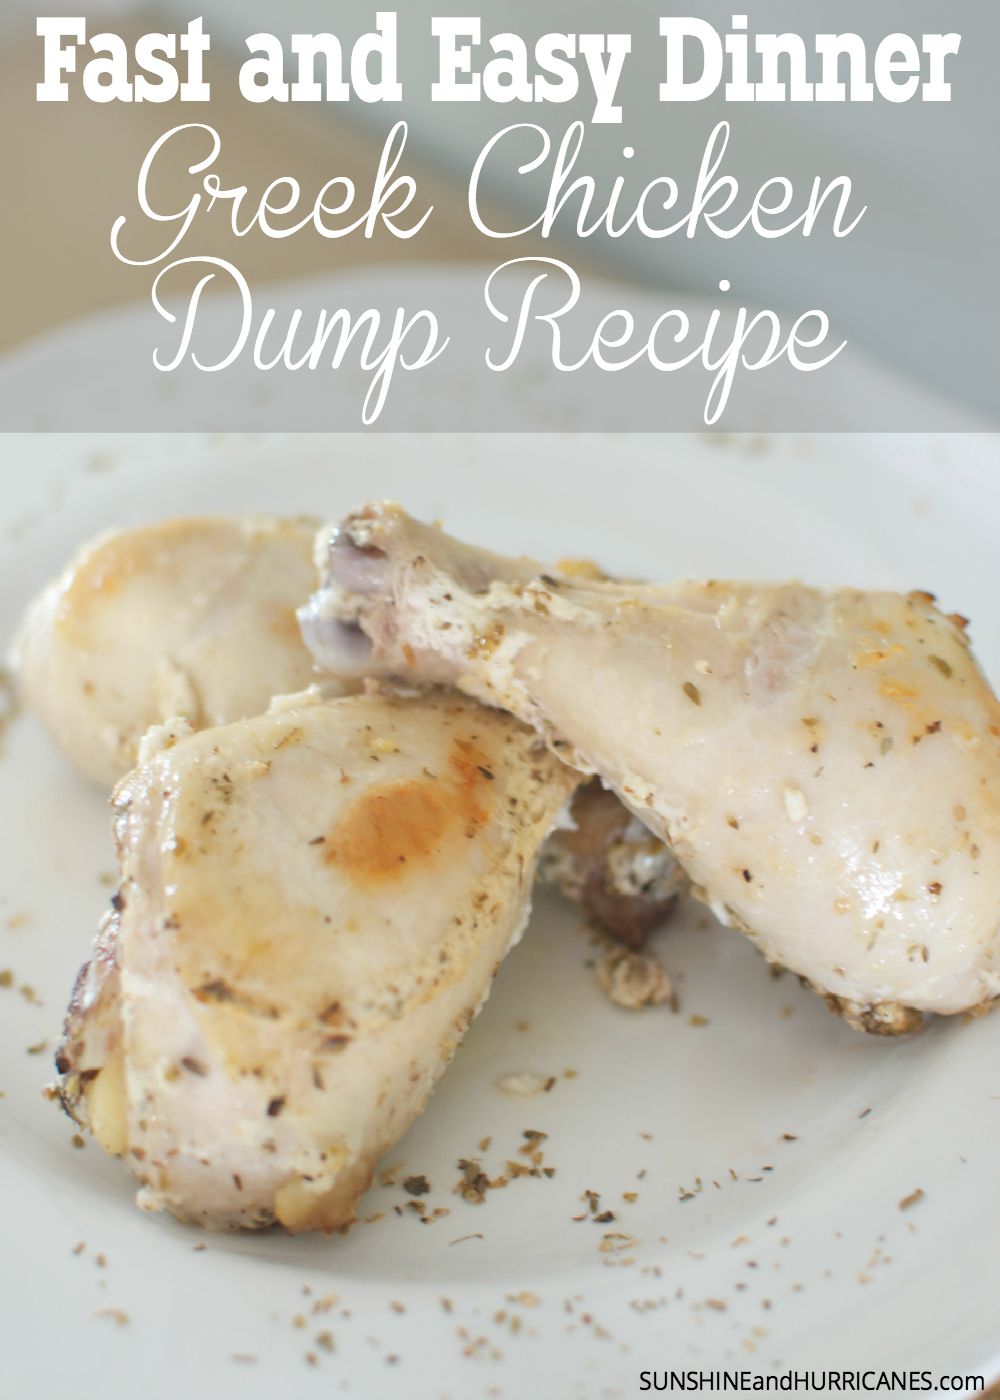 Looking for fast dinner options for your family? How about easy chicken recipes? This recipe for Greek Chicken Dump comes together in just minutes with only a few ingredients. My kids love it and I'm happy to have a healthy dinner option that is super easy to make and very budget friendly. Fast and Easy Chicken Recipes - Greek Chicken Dump. SunshineandHurricanes.com